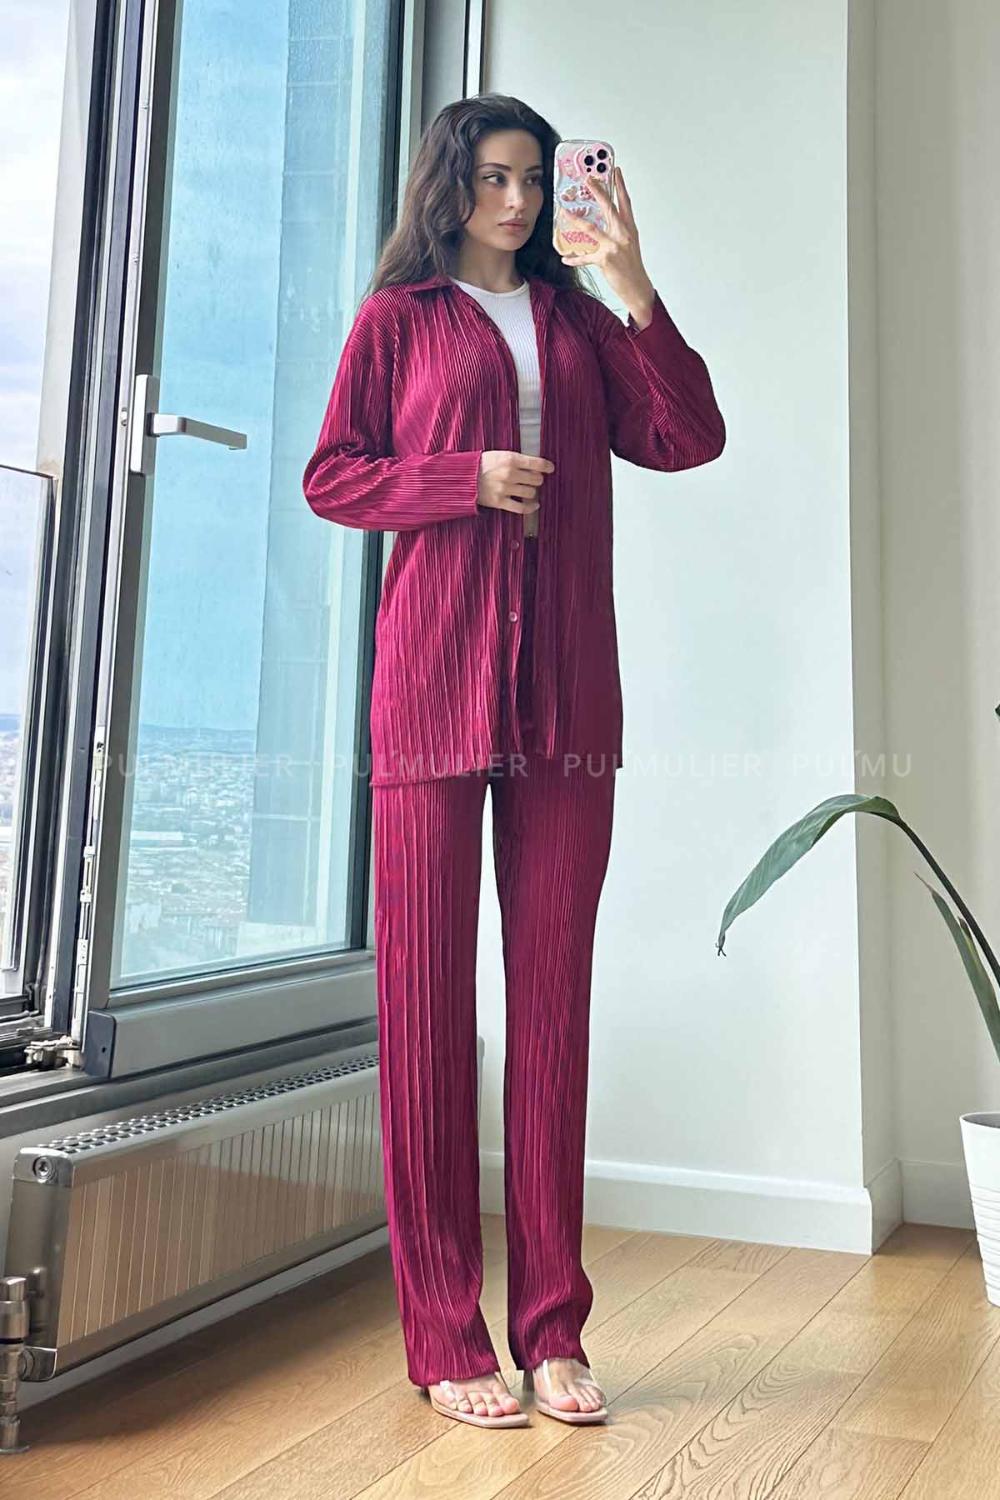 Sour Cherry Shirt Collar Long Arm Without Accessories Cotton Fabric Regular Trousers Comfortable Suit